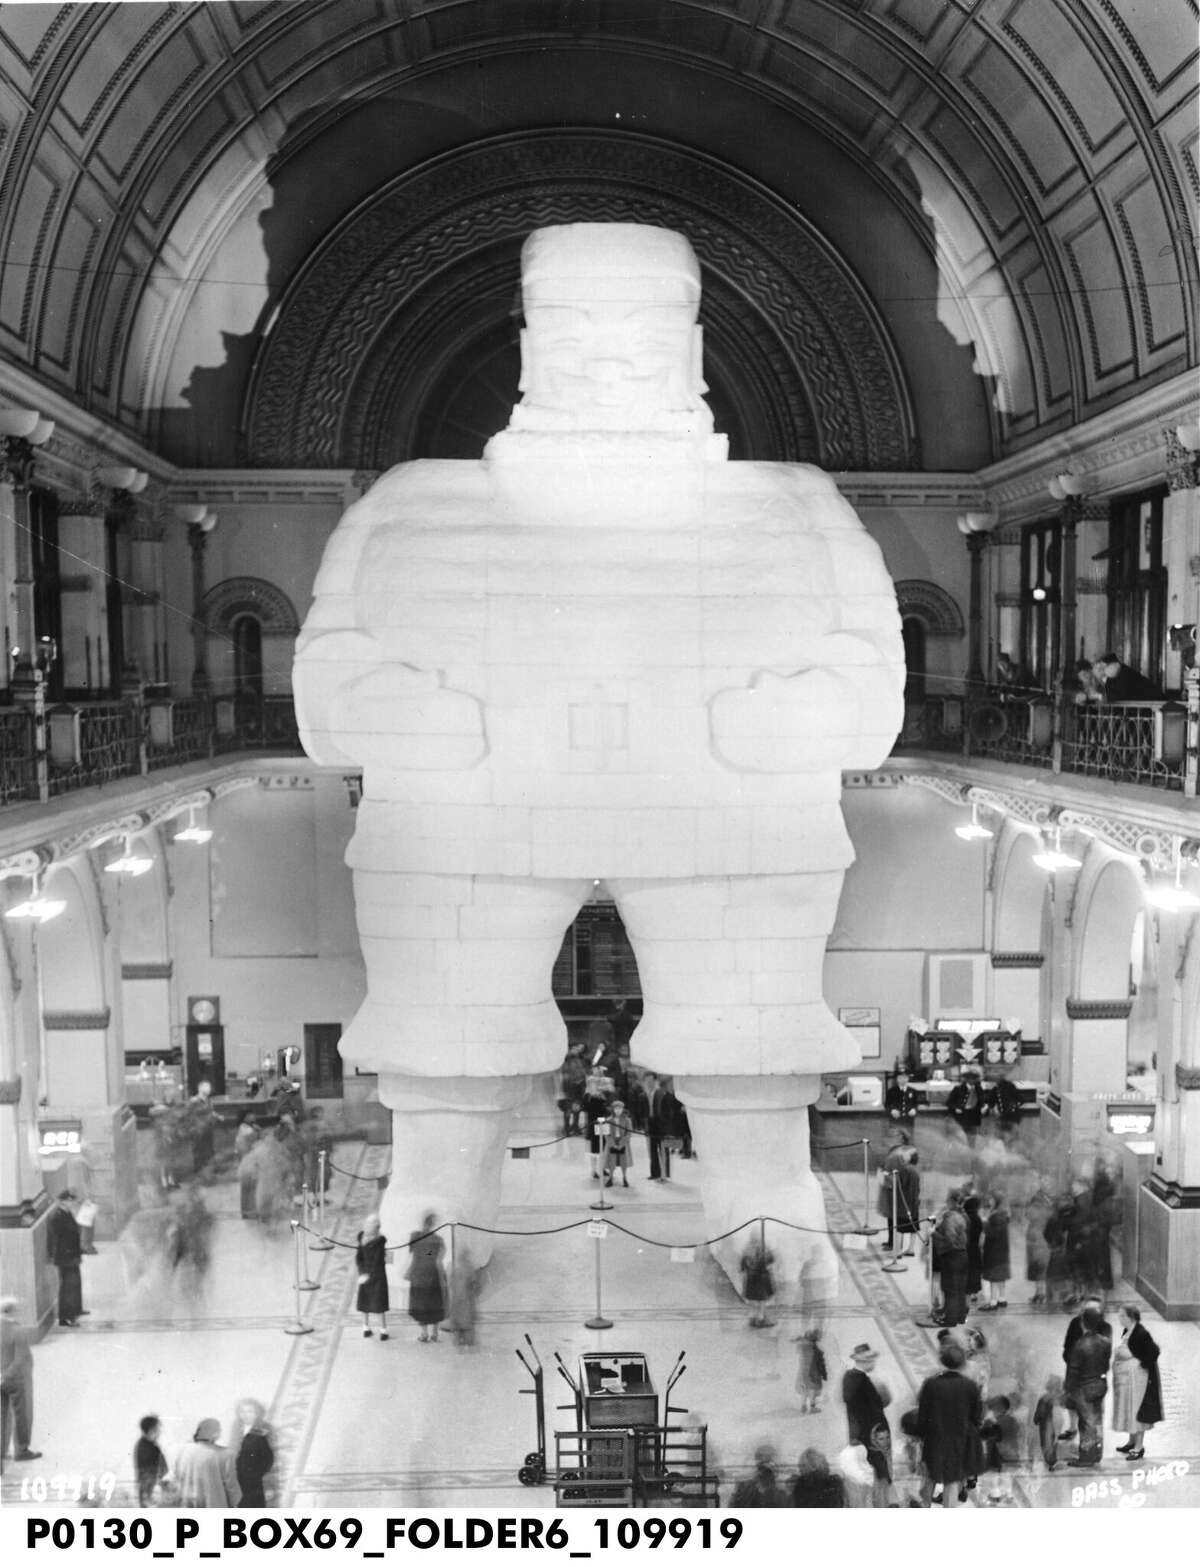 In 1949, Walter Dean Dowell created a giant Santa Claus statue out of Styrofoam from The Dow Chemical Co. The finished statue stood at 54 feet tall and weighed roughly four tons.